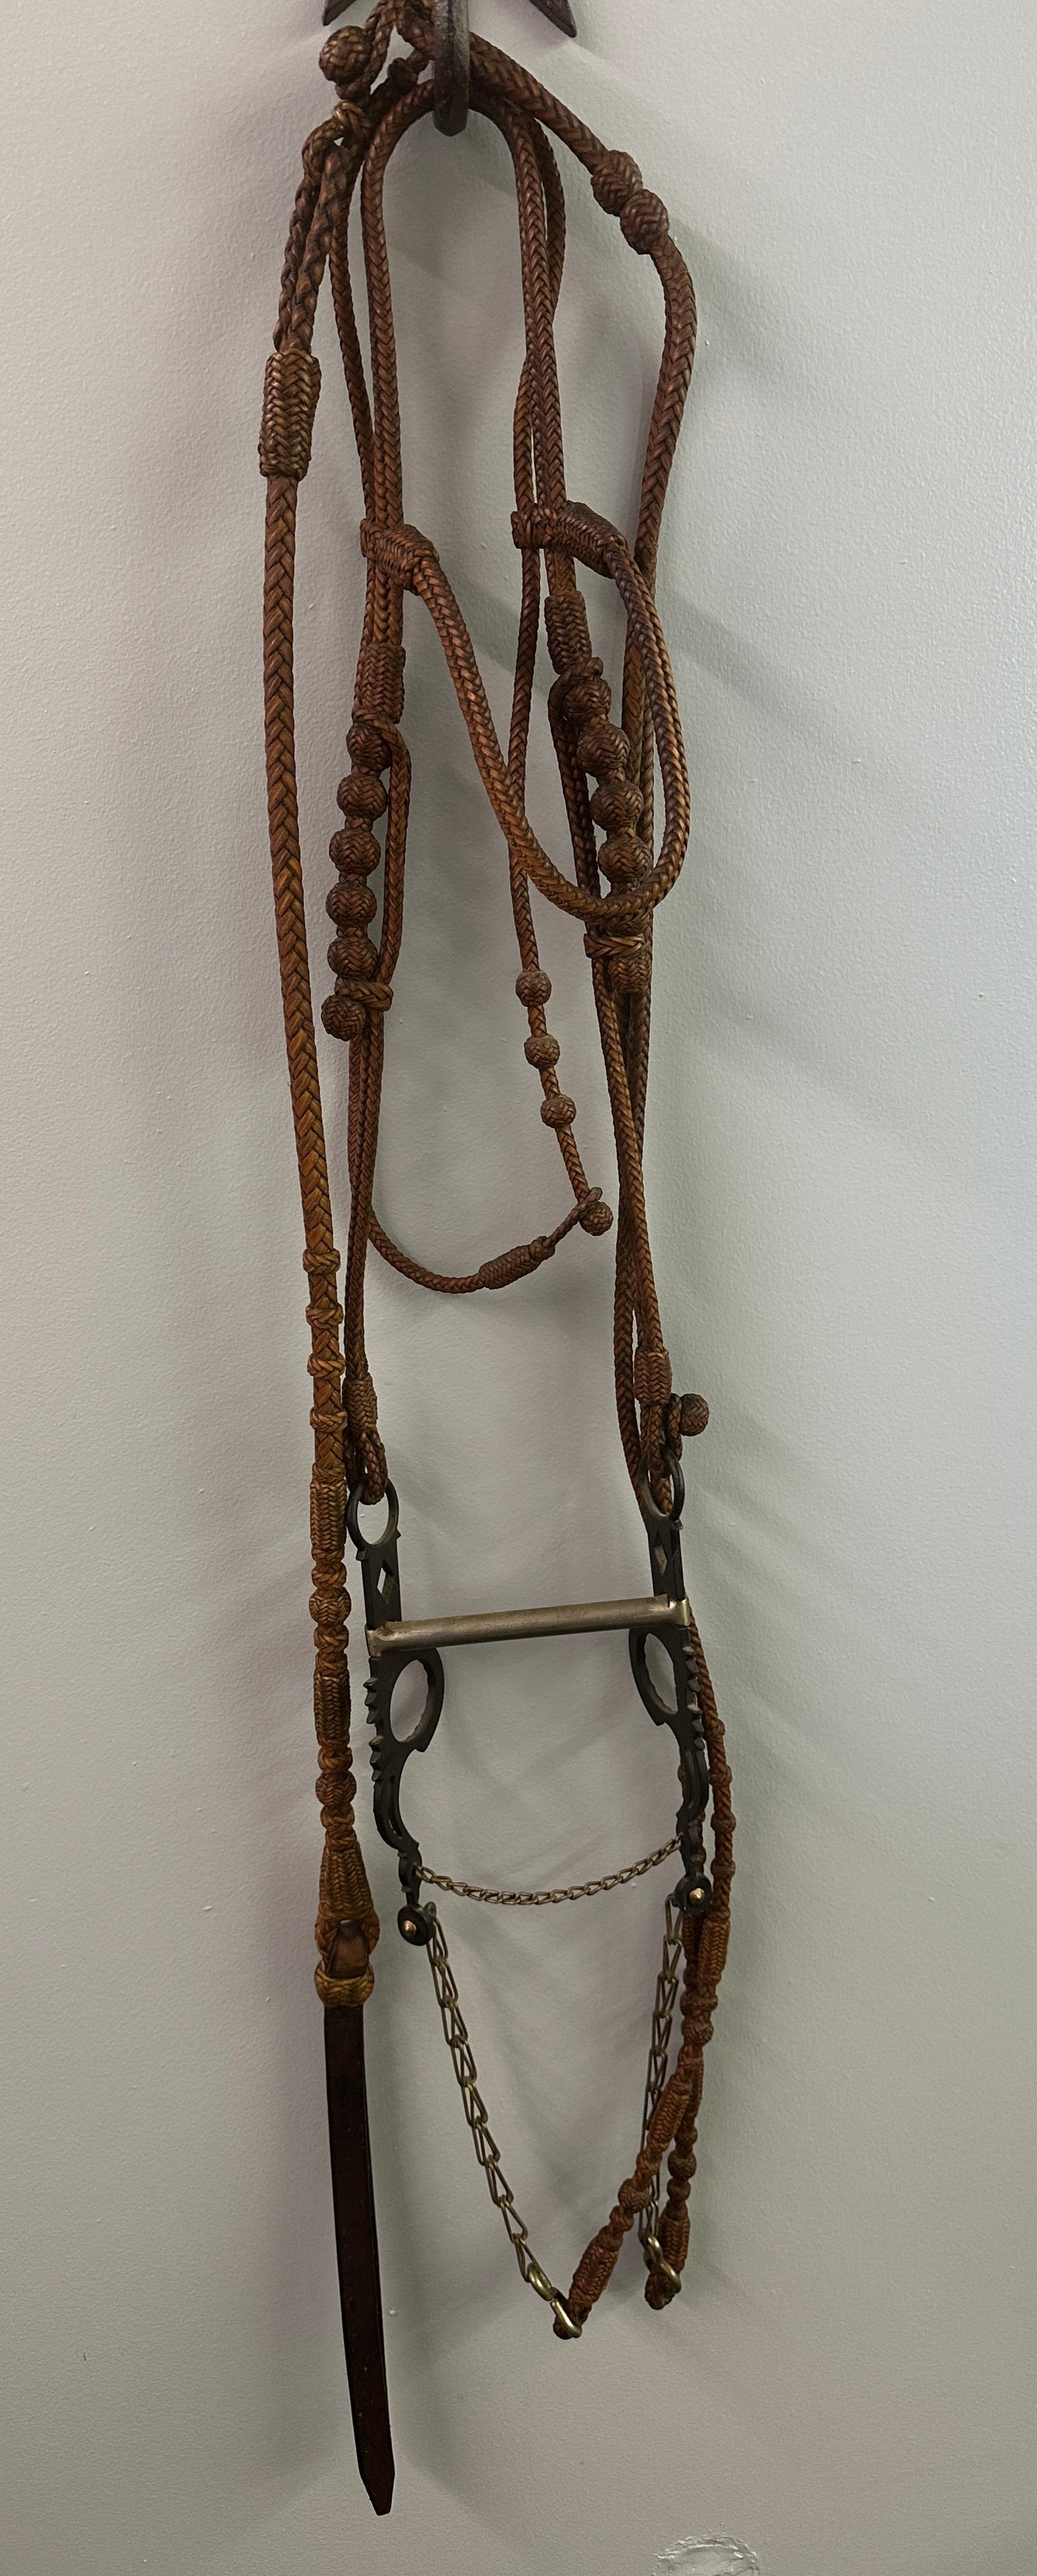 Antique Western Braided leather Bridle with bit Circa 1935